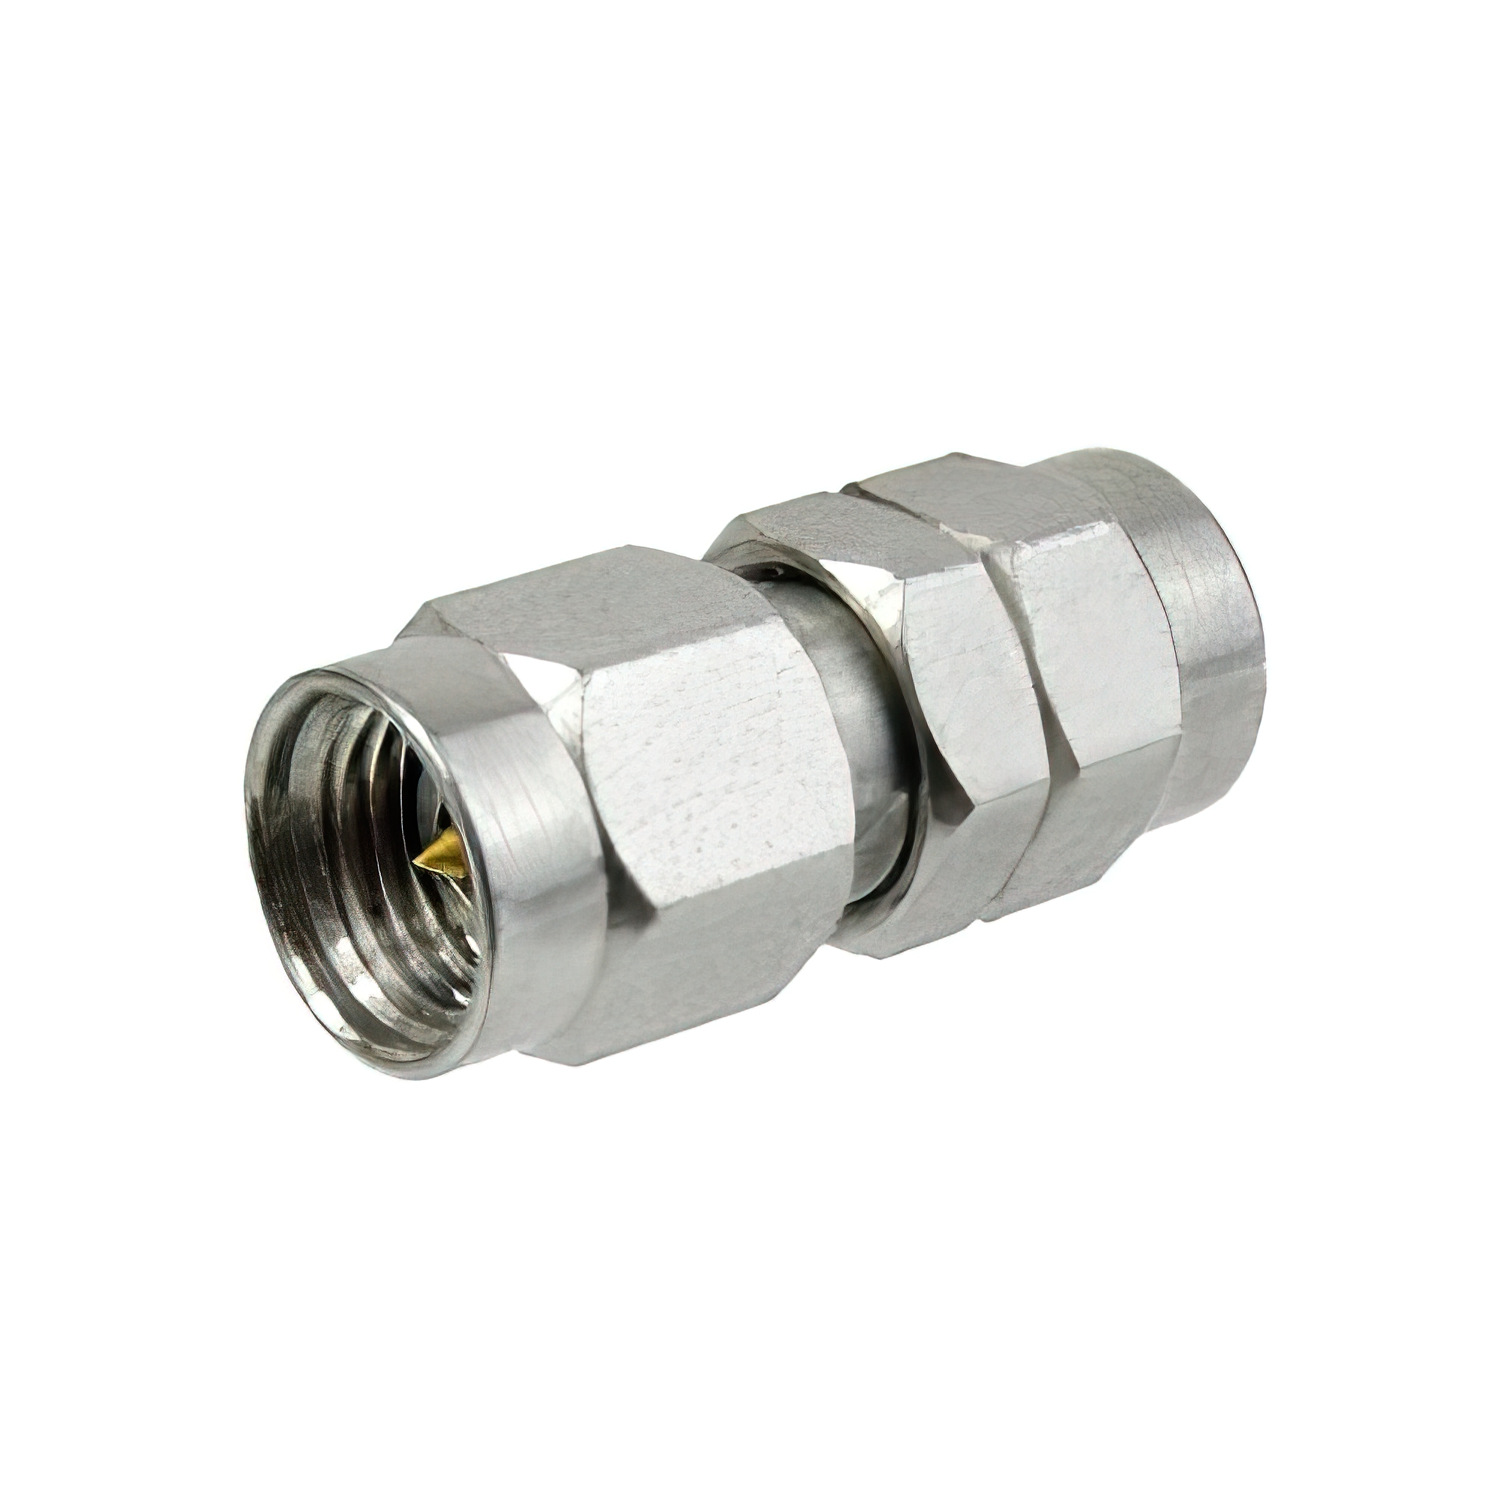 2.92mm male to 1.85mm male adapter1